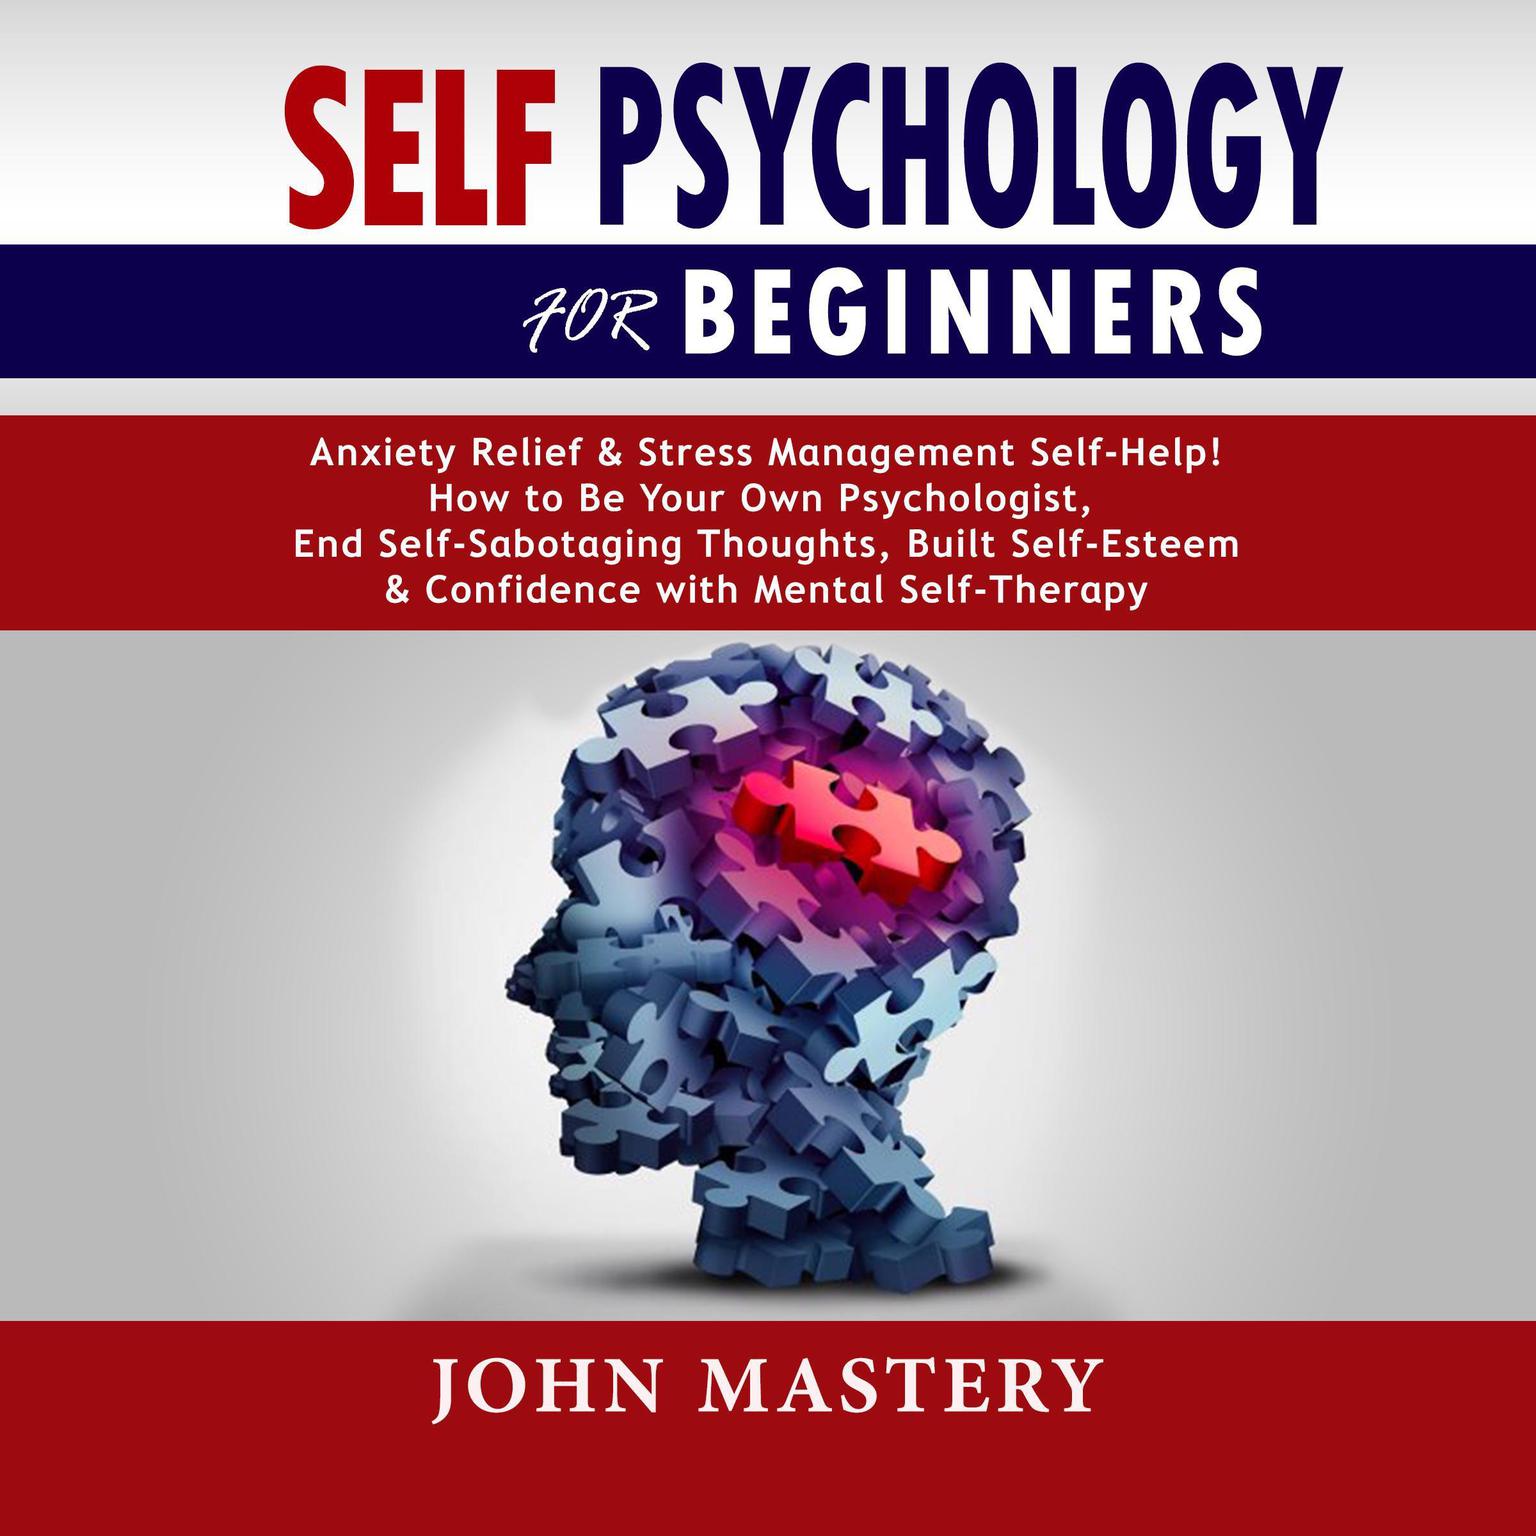 Self Psychology For Beginners: Anxiety Relief and Stress Management Self-Help! How to Be Your Own Psychologist, End Self-Sabotaging Thoughts, Built Self-Esteem and Confidence with Mental Self-Therapy Audiobook, by John Mastery